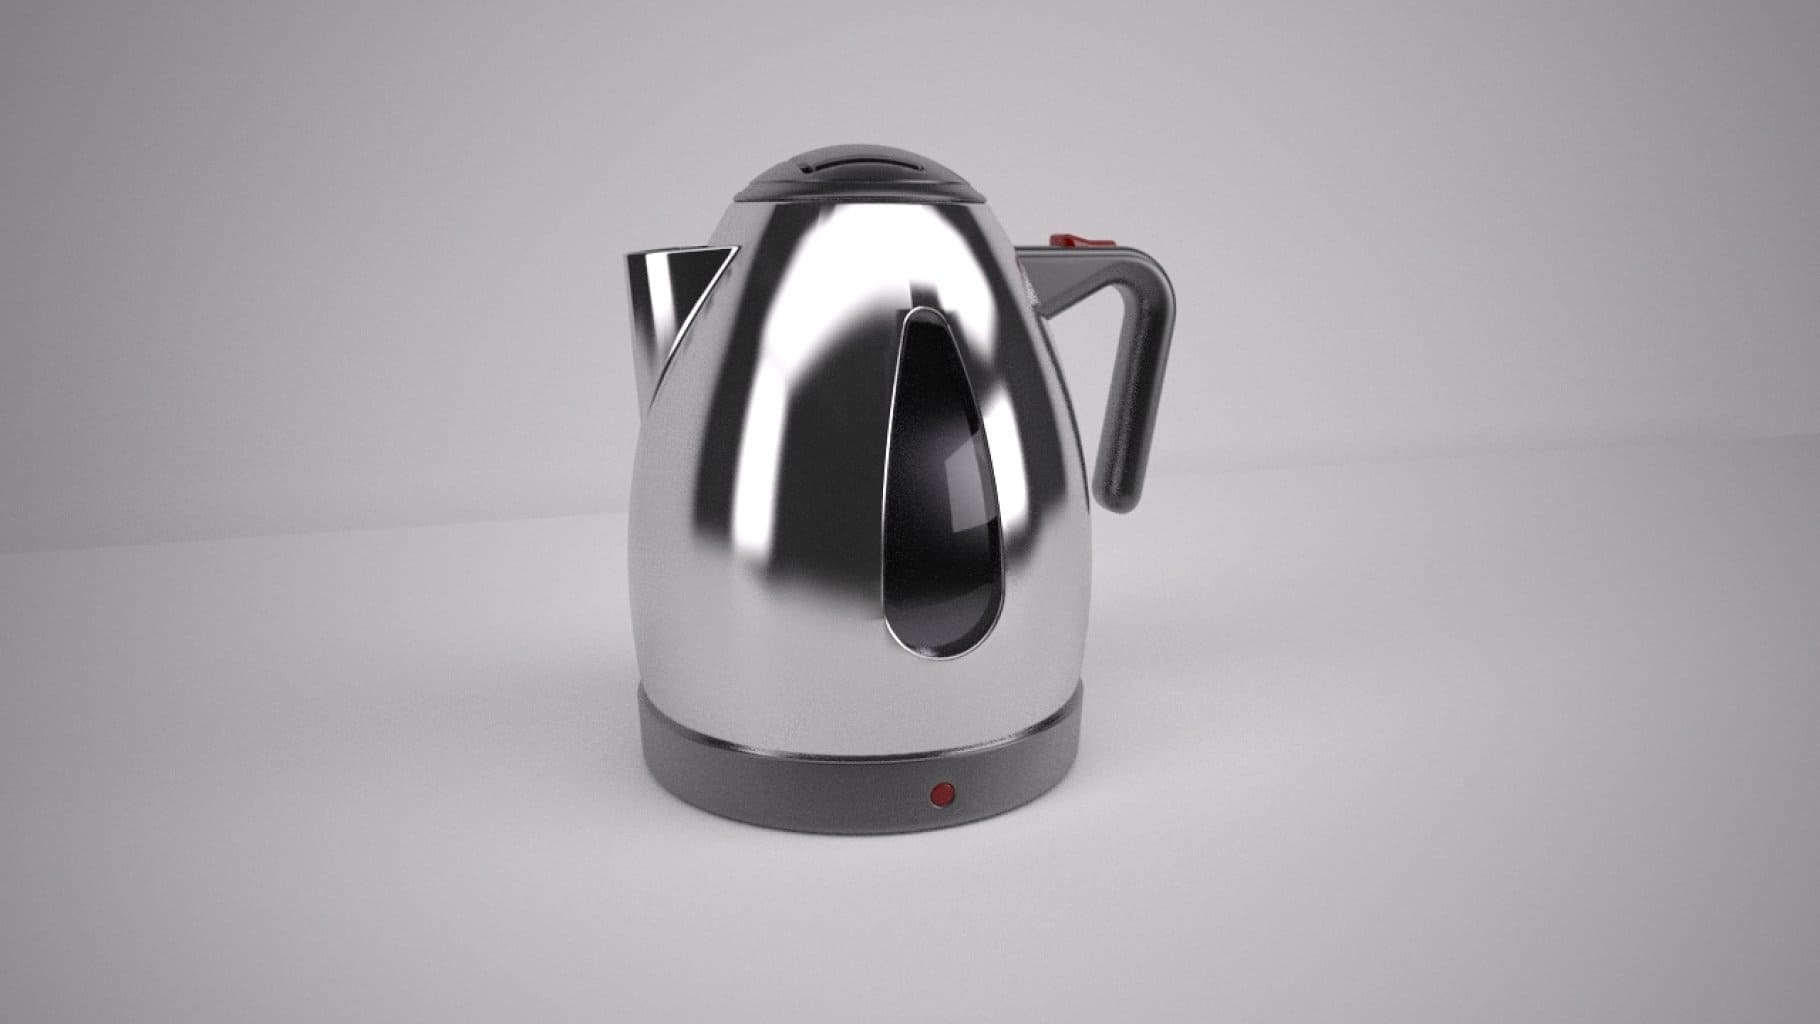 Stainless steel electric kettle.